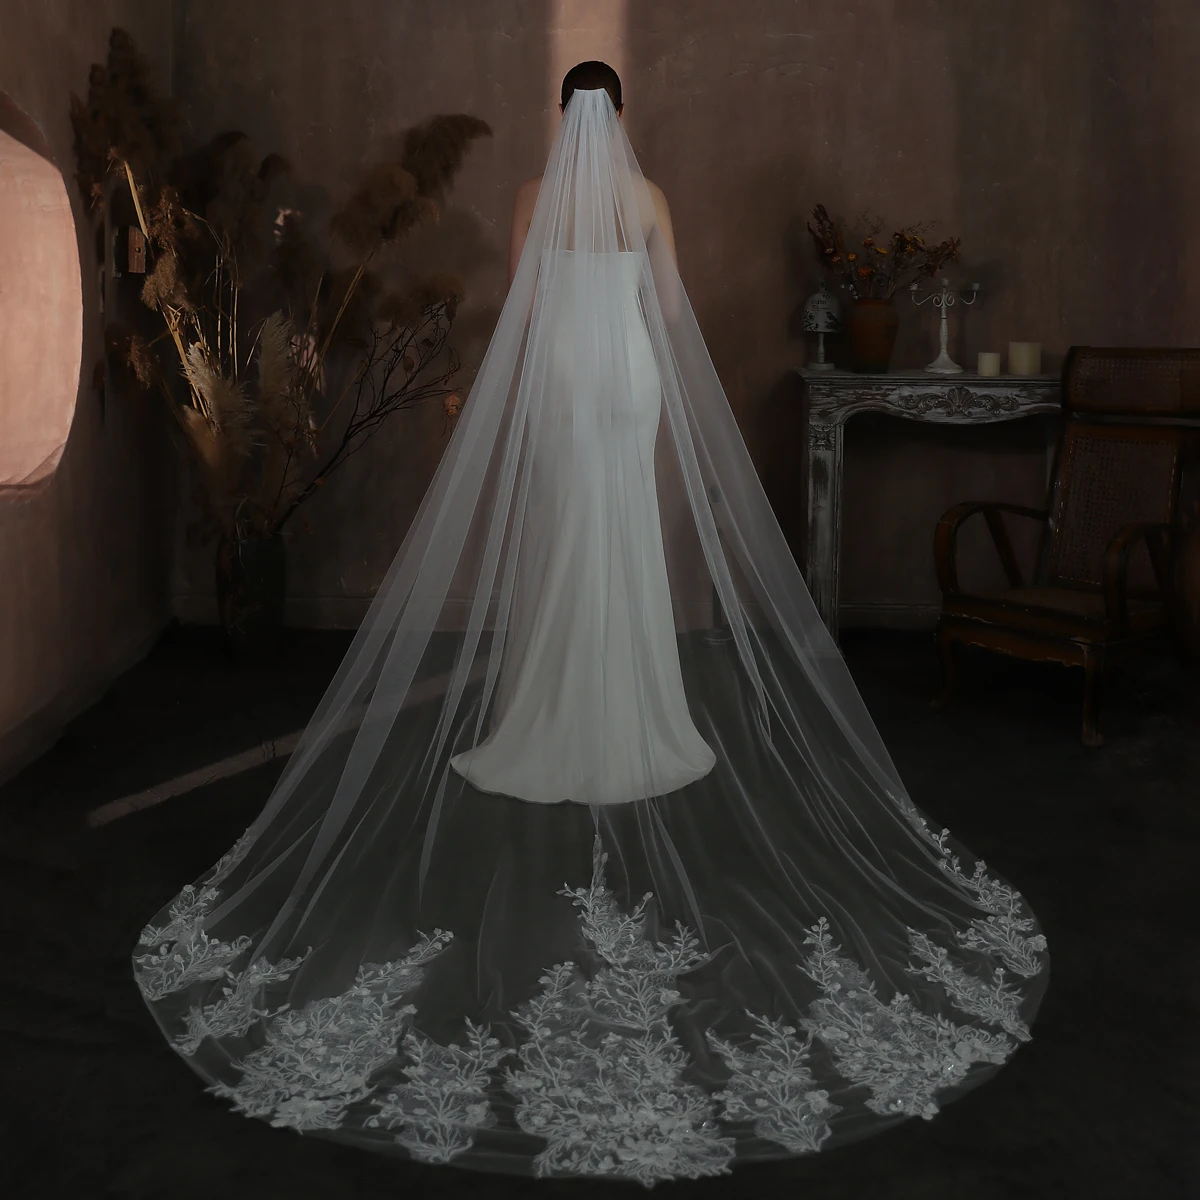 

Luxurious Wedding Bridal Cathedral Veil Soft Tulle Sequins-Lace Appliqued White Handmade Brides Veil with Long Floor Train V688